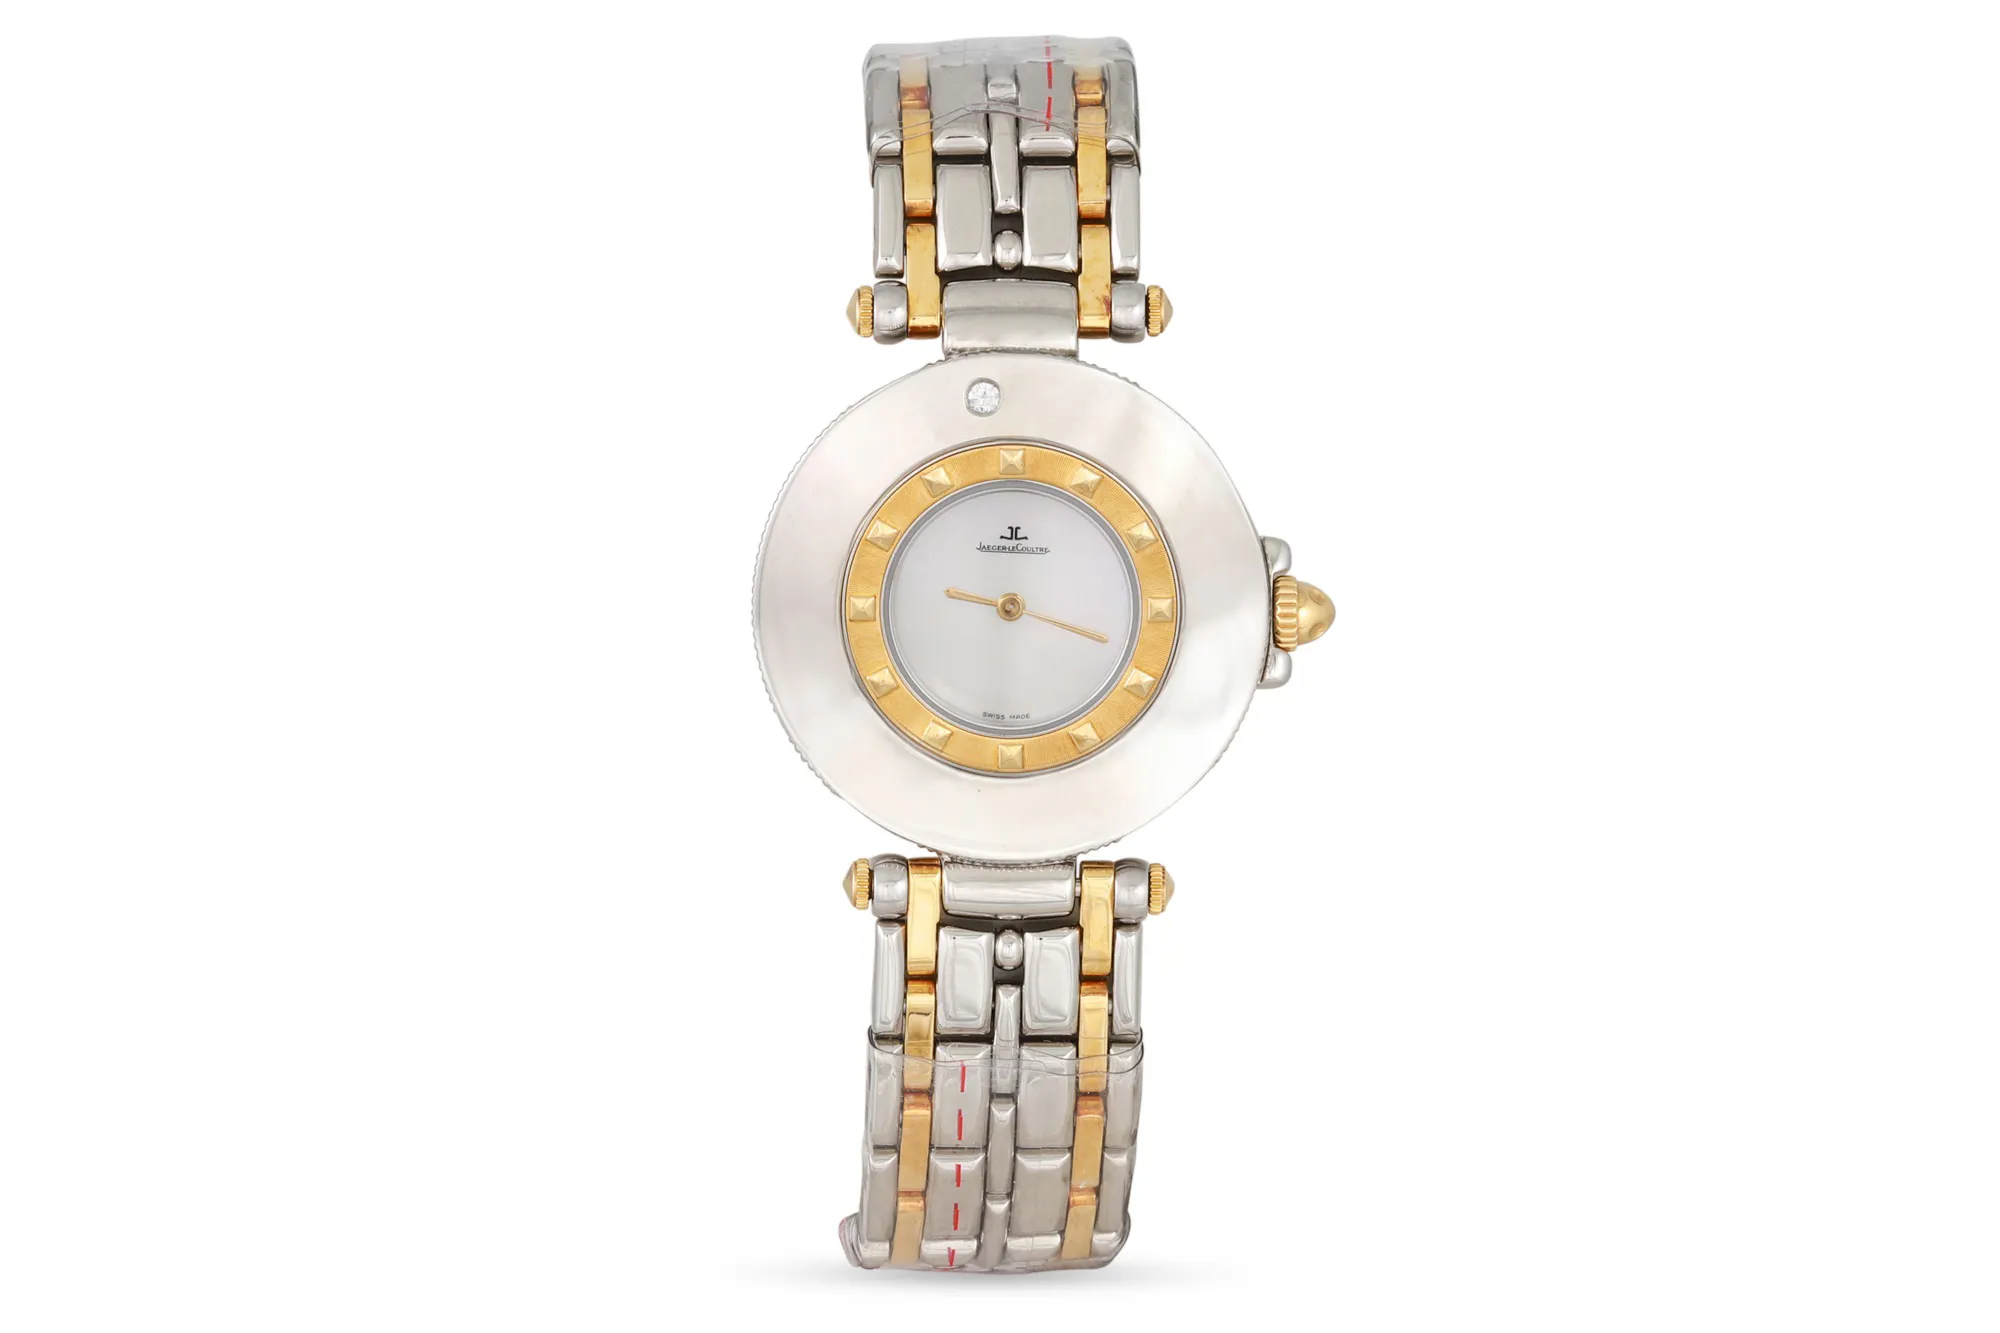 Jaeger-LeCoultre Rendez-Vous nullmm Stainless steel and diamond-set Mother-of-pearl